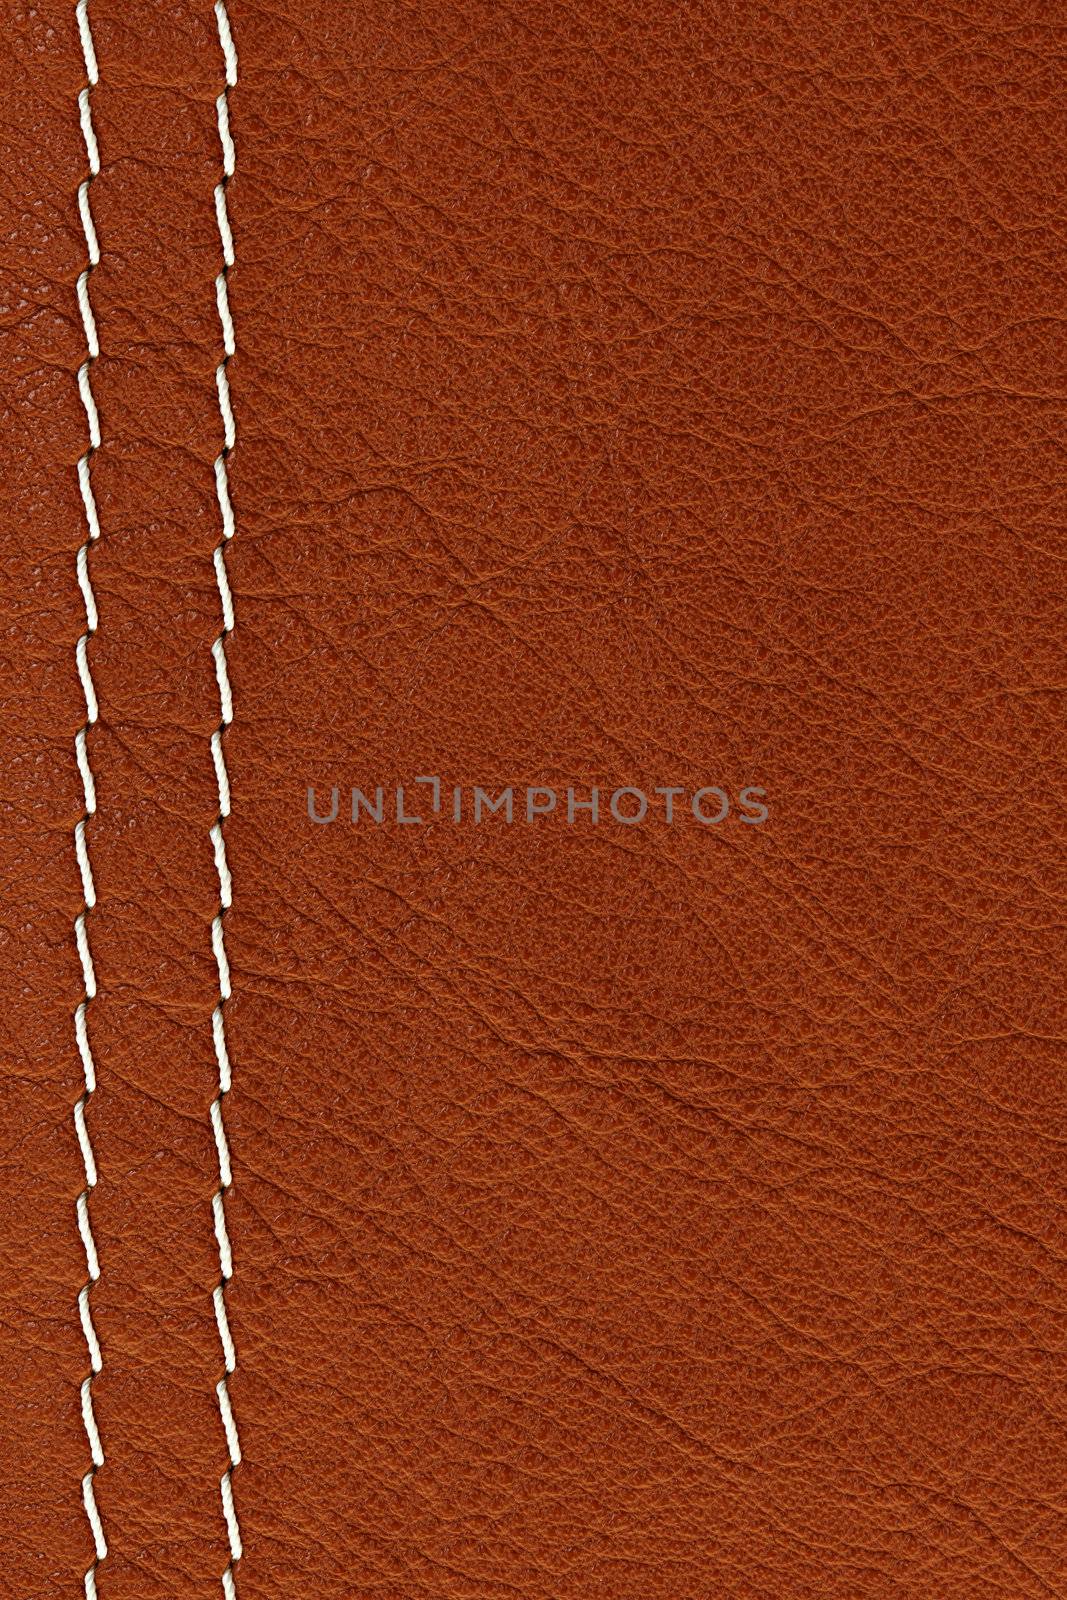 Brown leather background by elenathewise